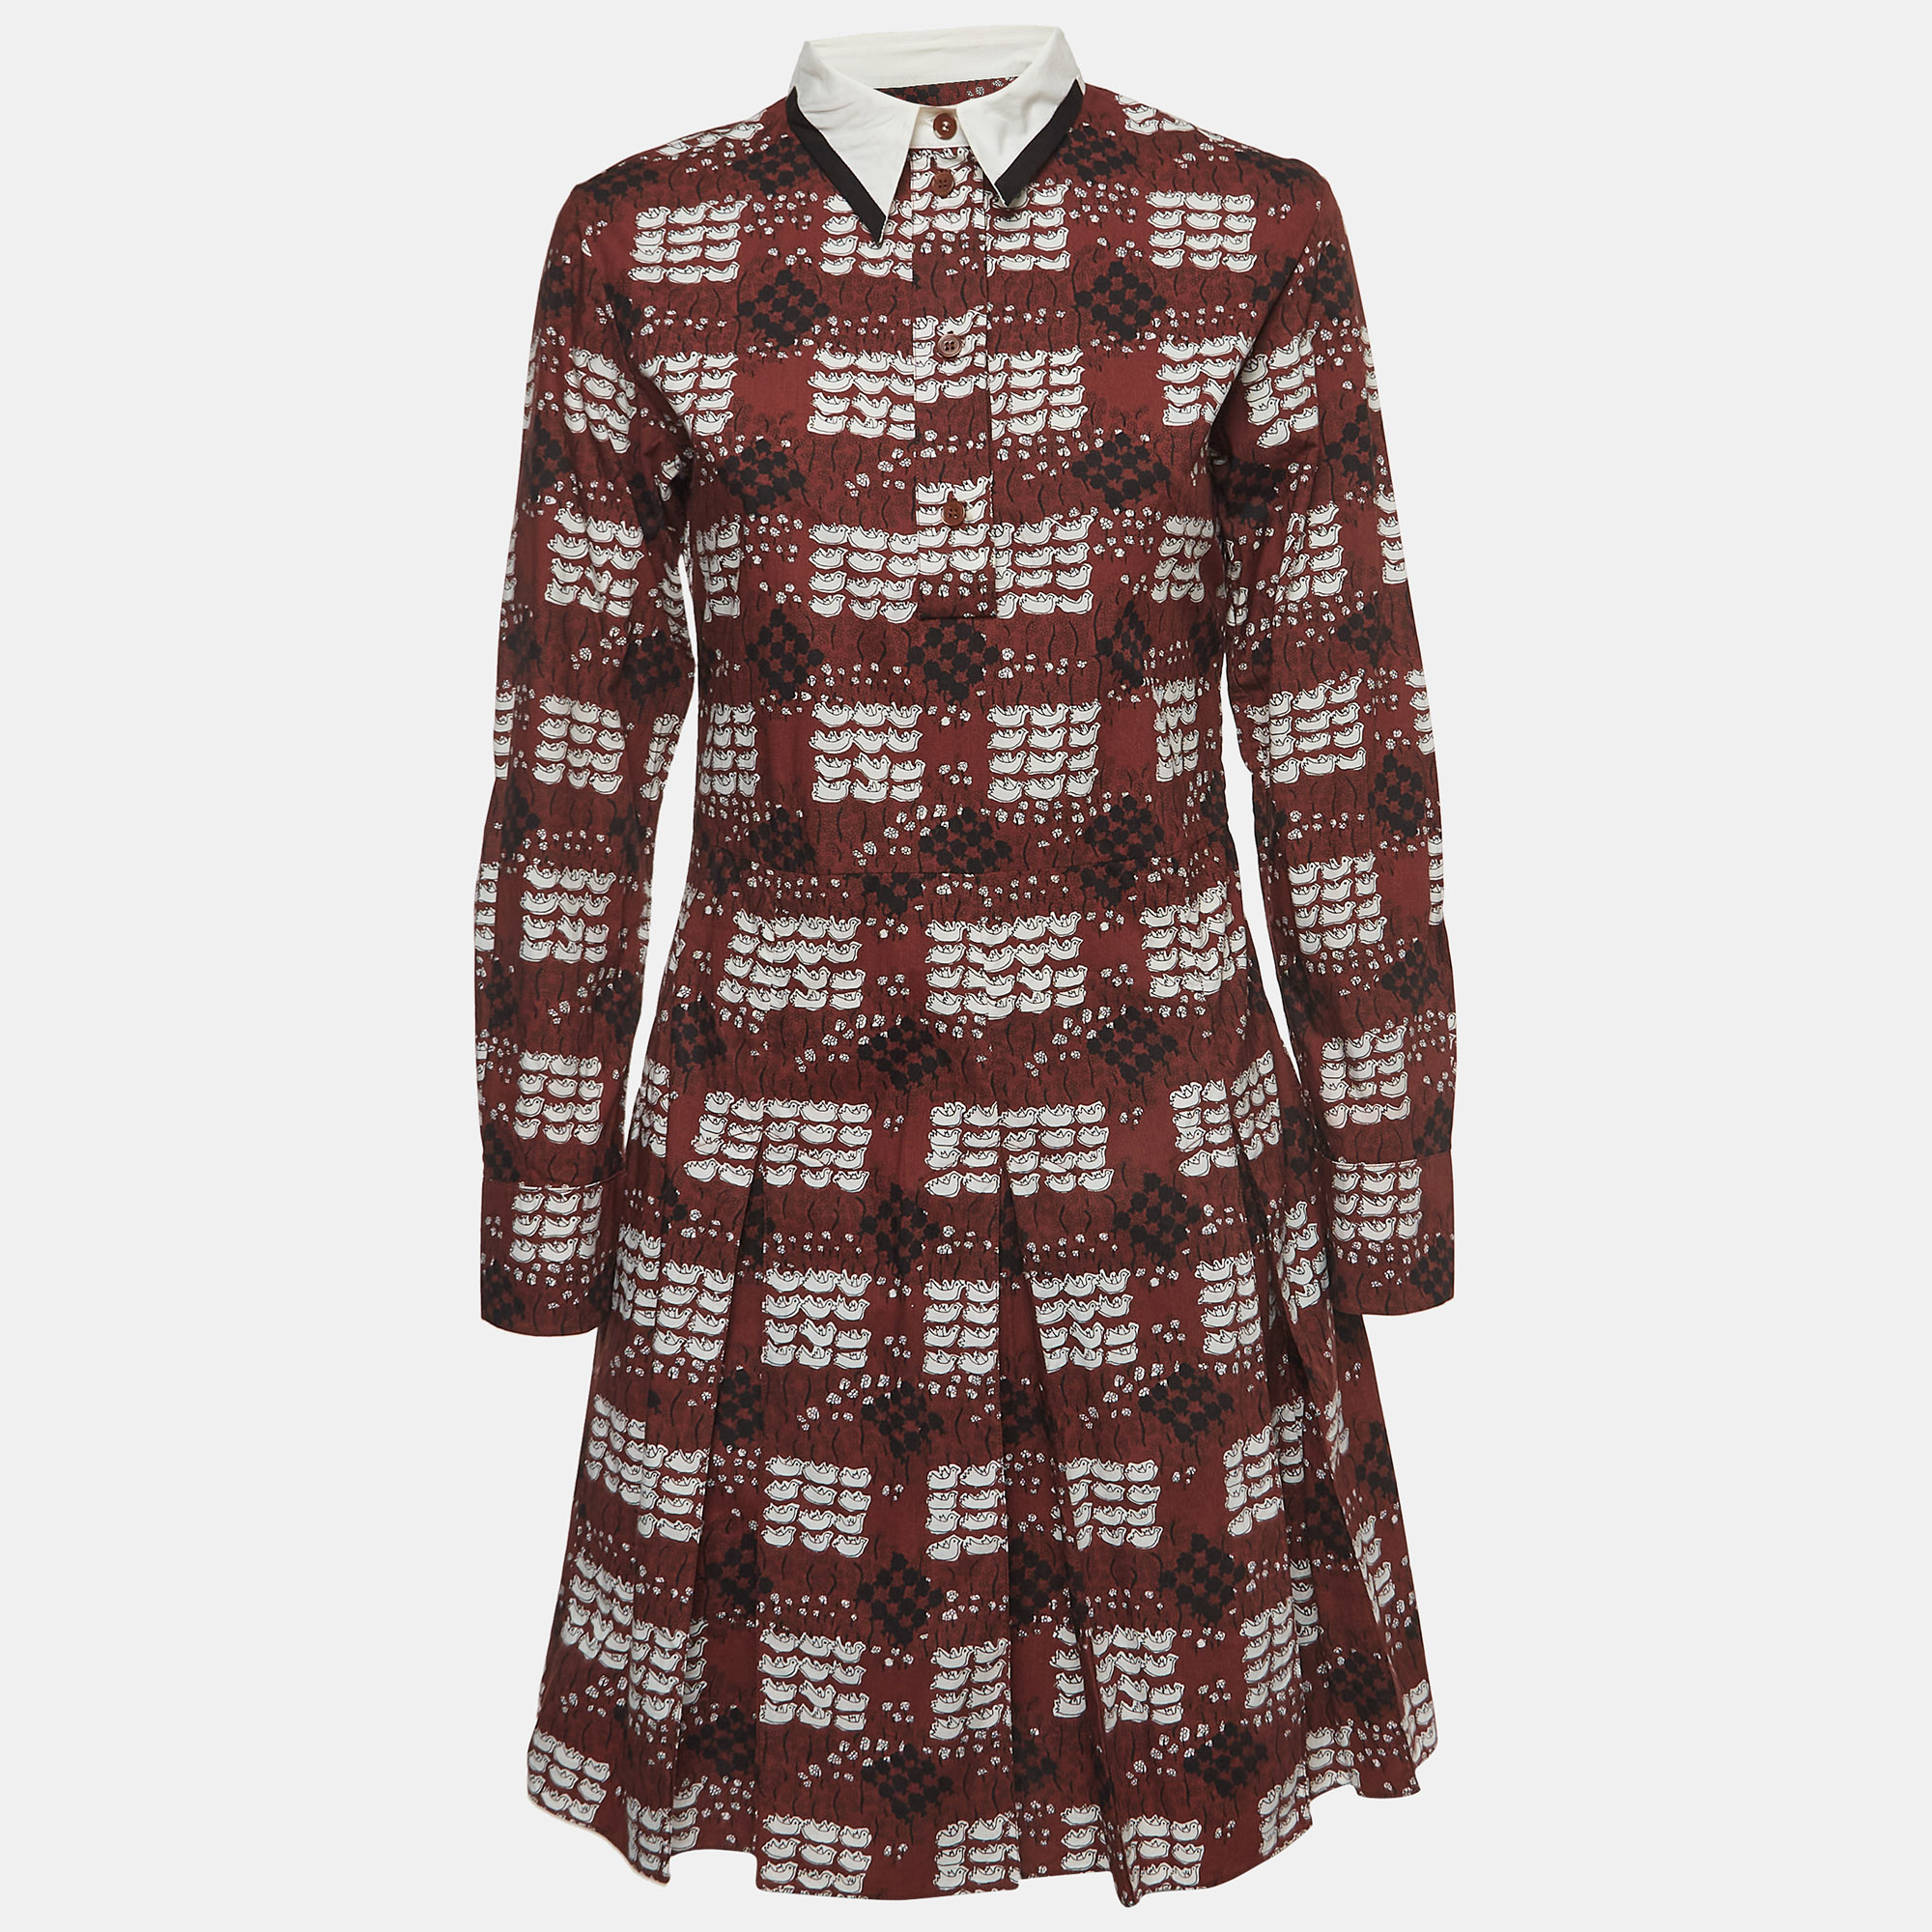 Pre-owned Marni Summer Edition 2013 Brown Print Cotton Pleated Button Front Shirt Dress S